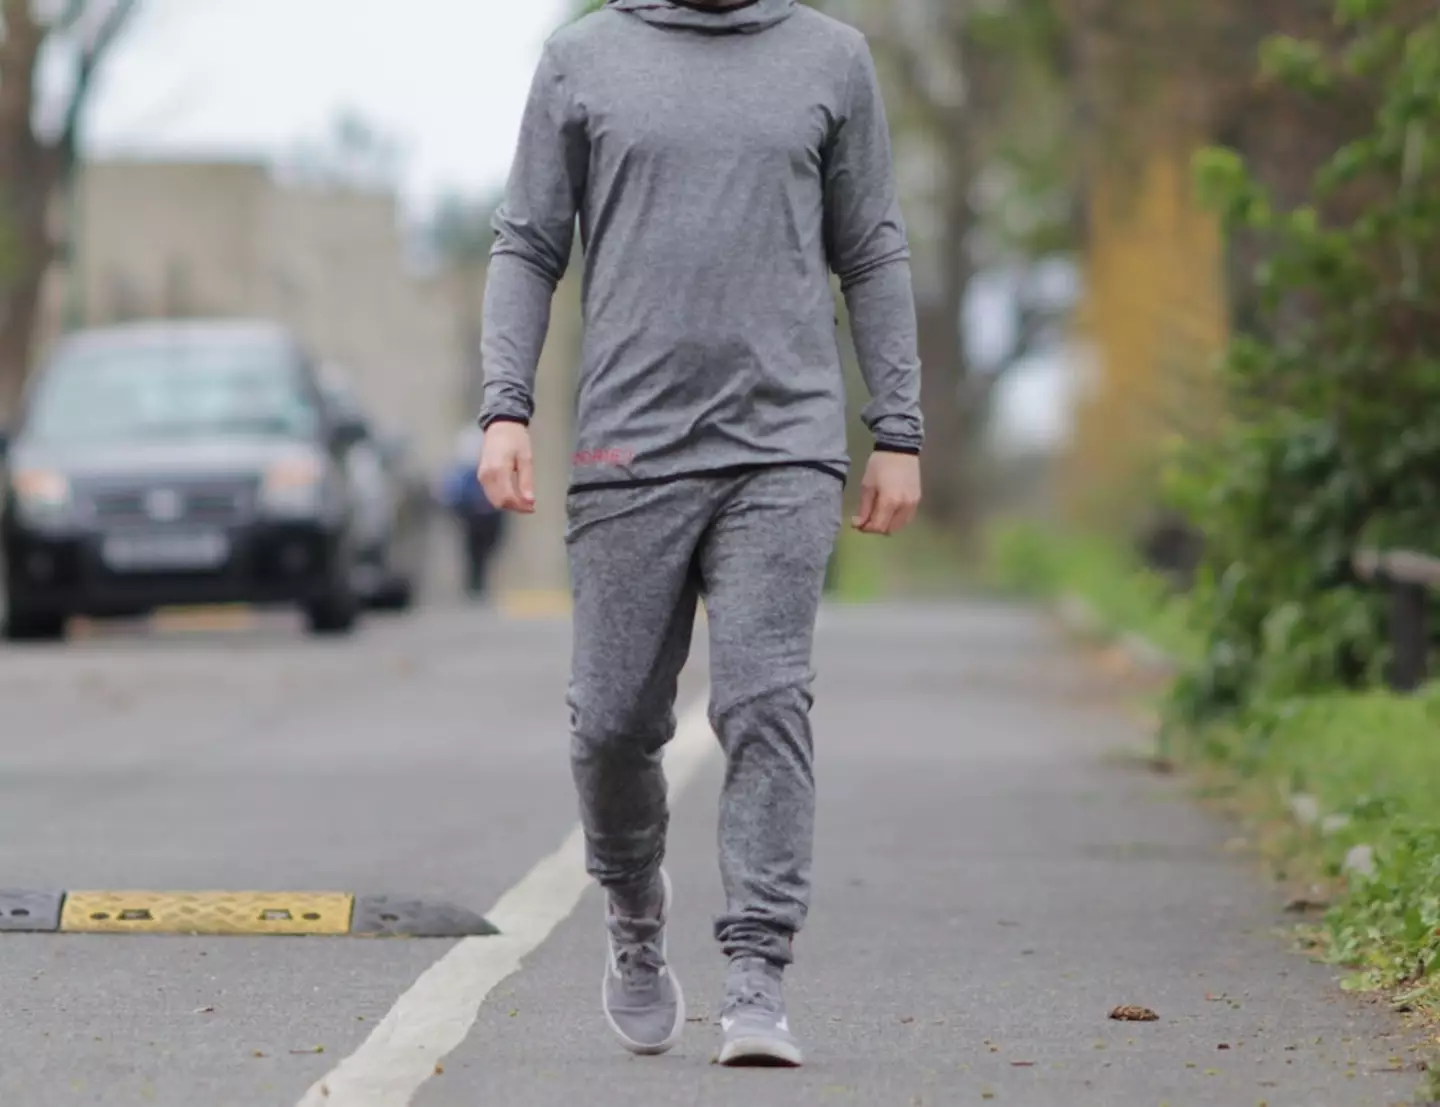 Grey tracksuit - yay or nay?